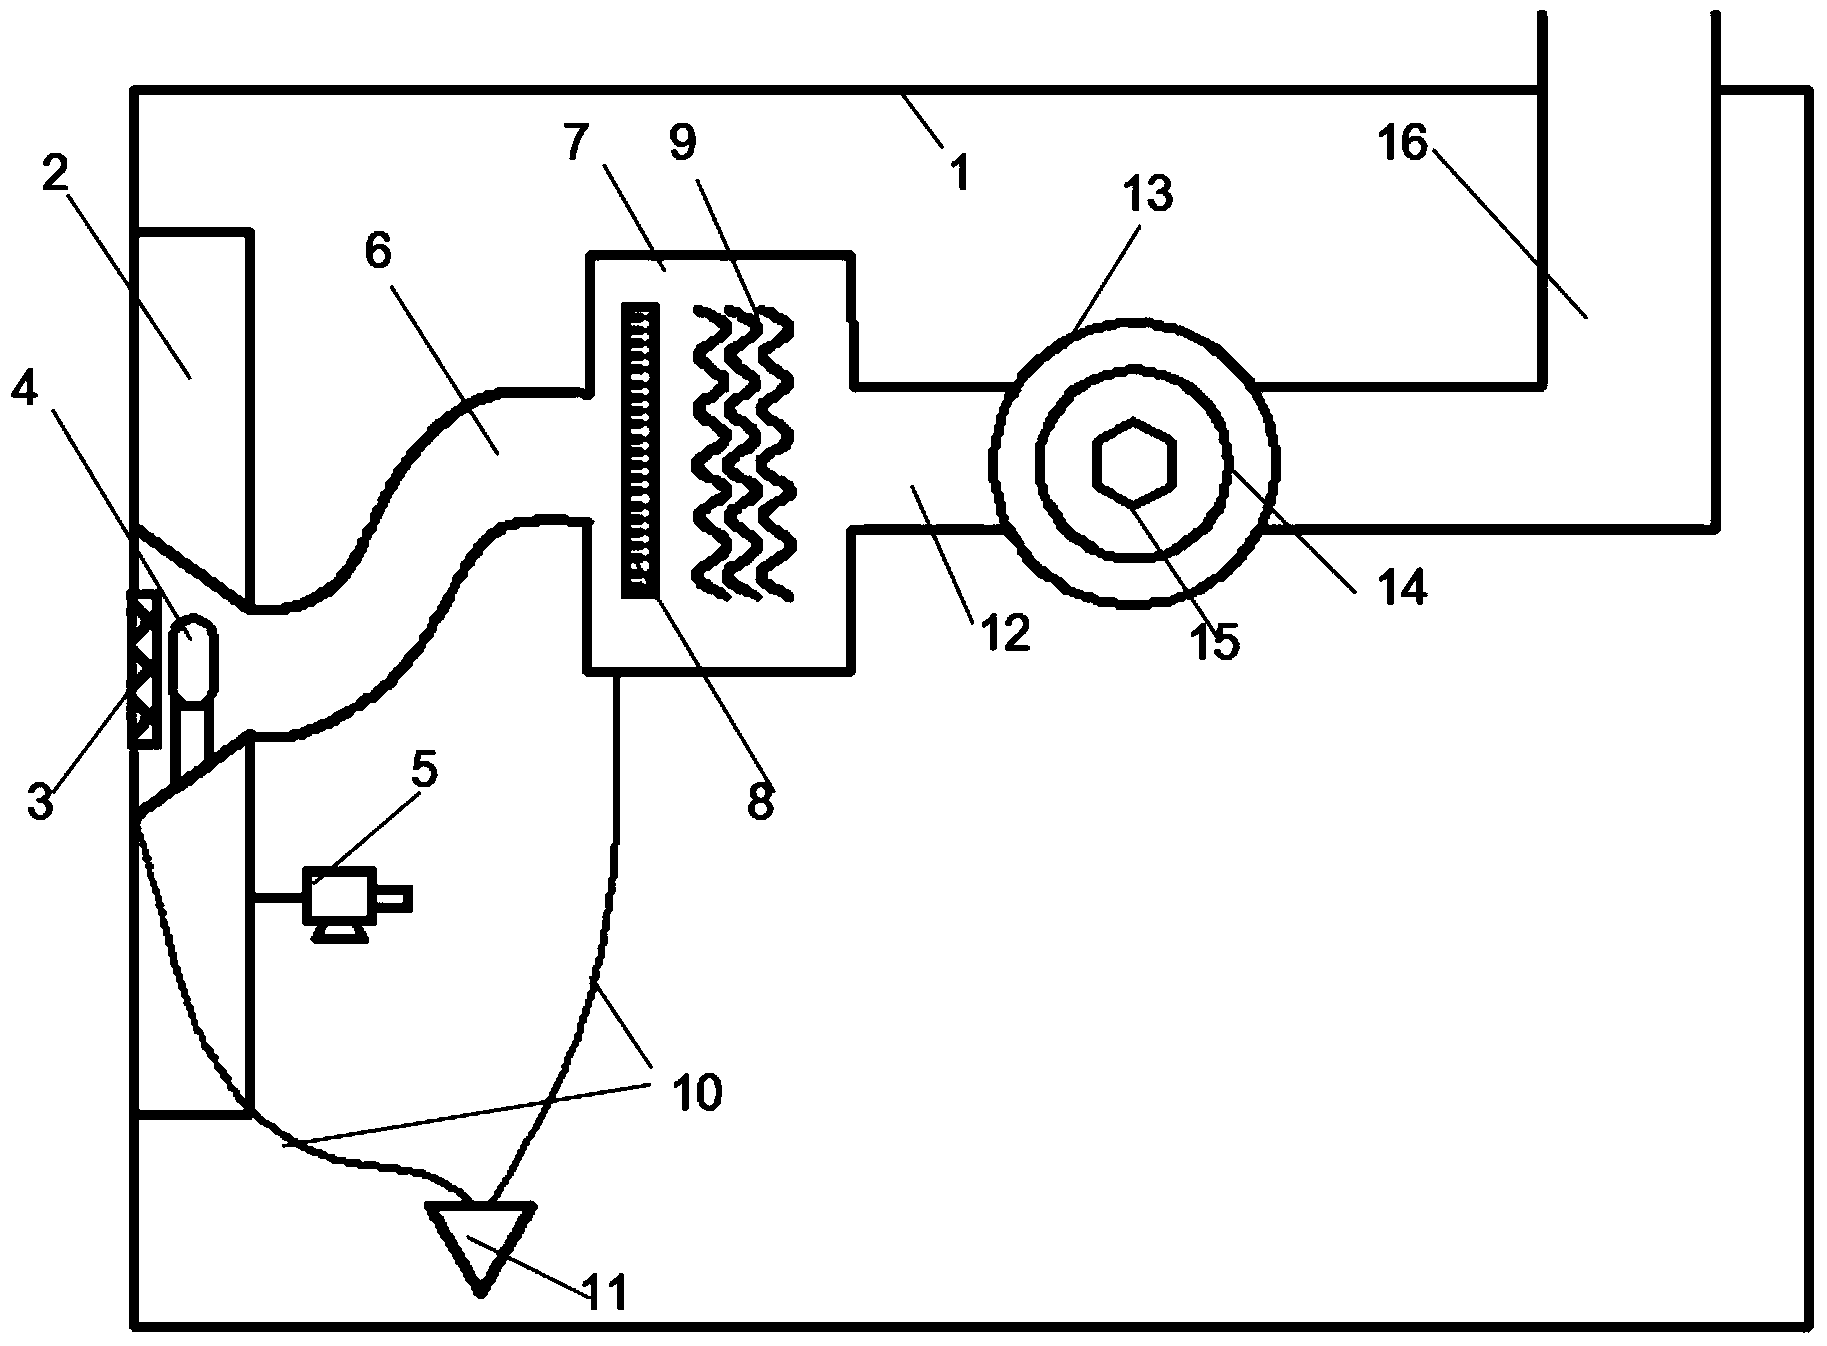 Air multiplication-based condensation adsorption ionization purification cooking fume treatment system